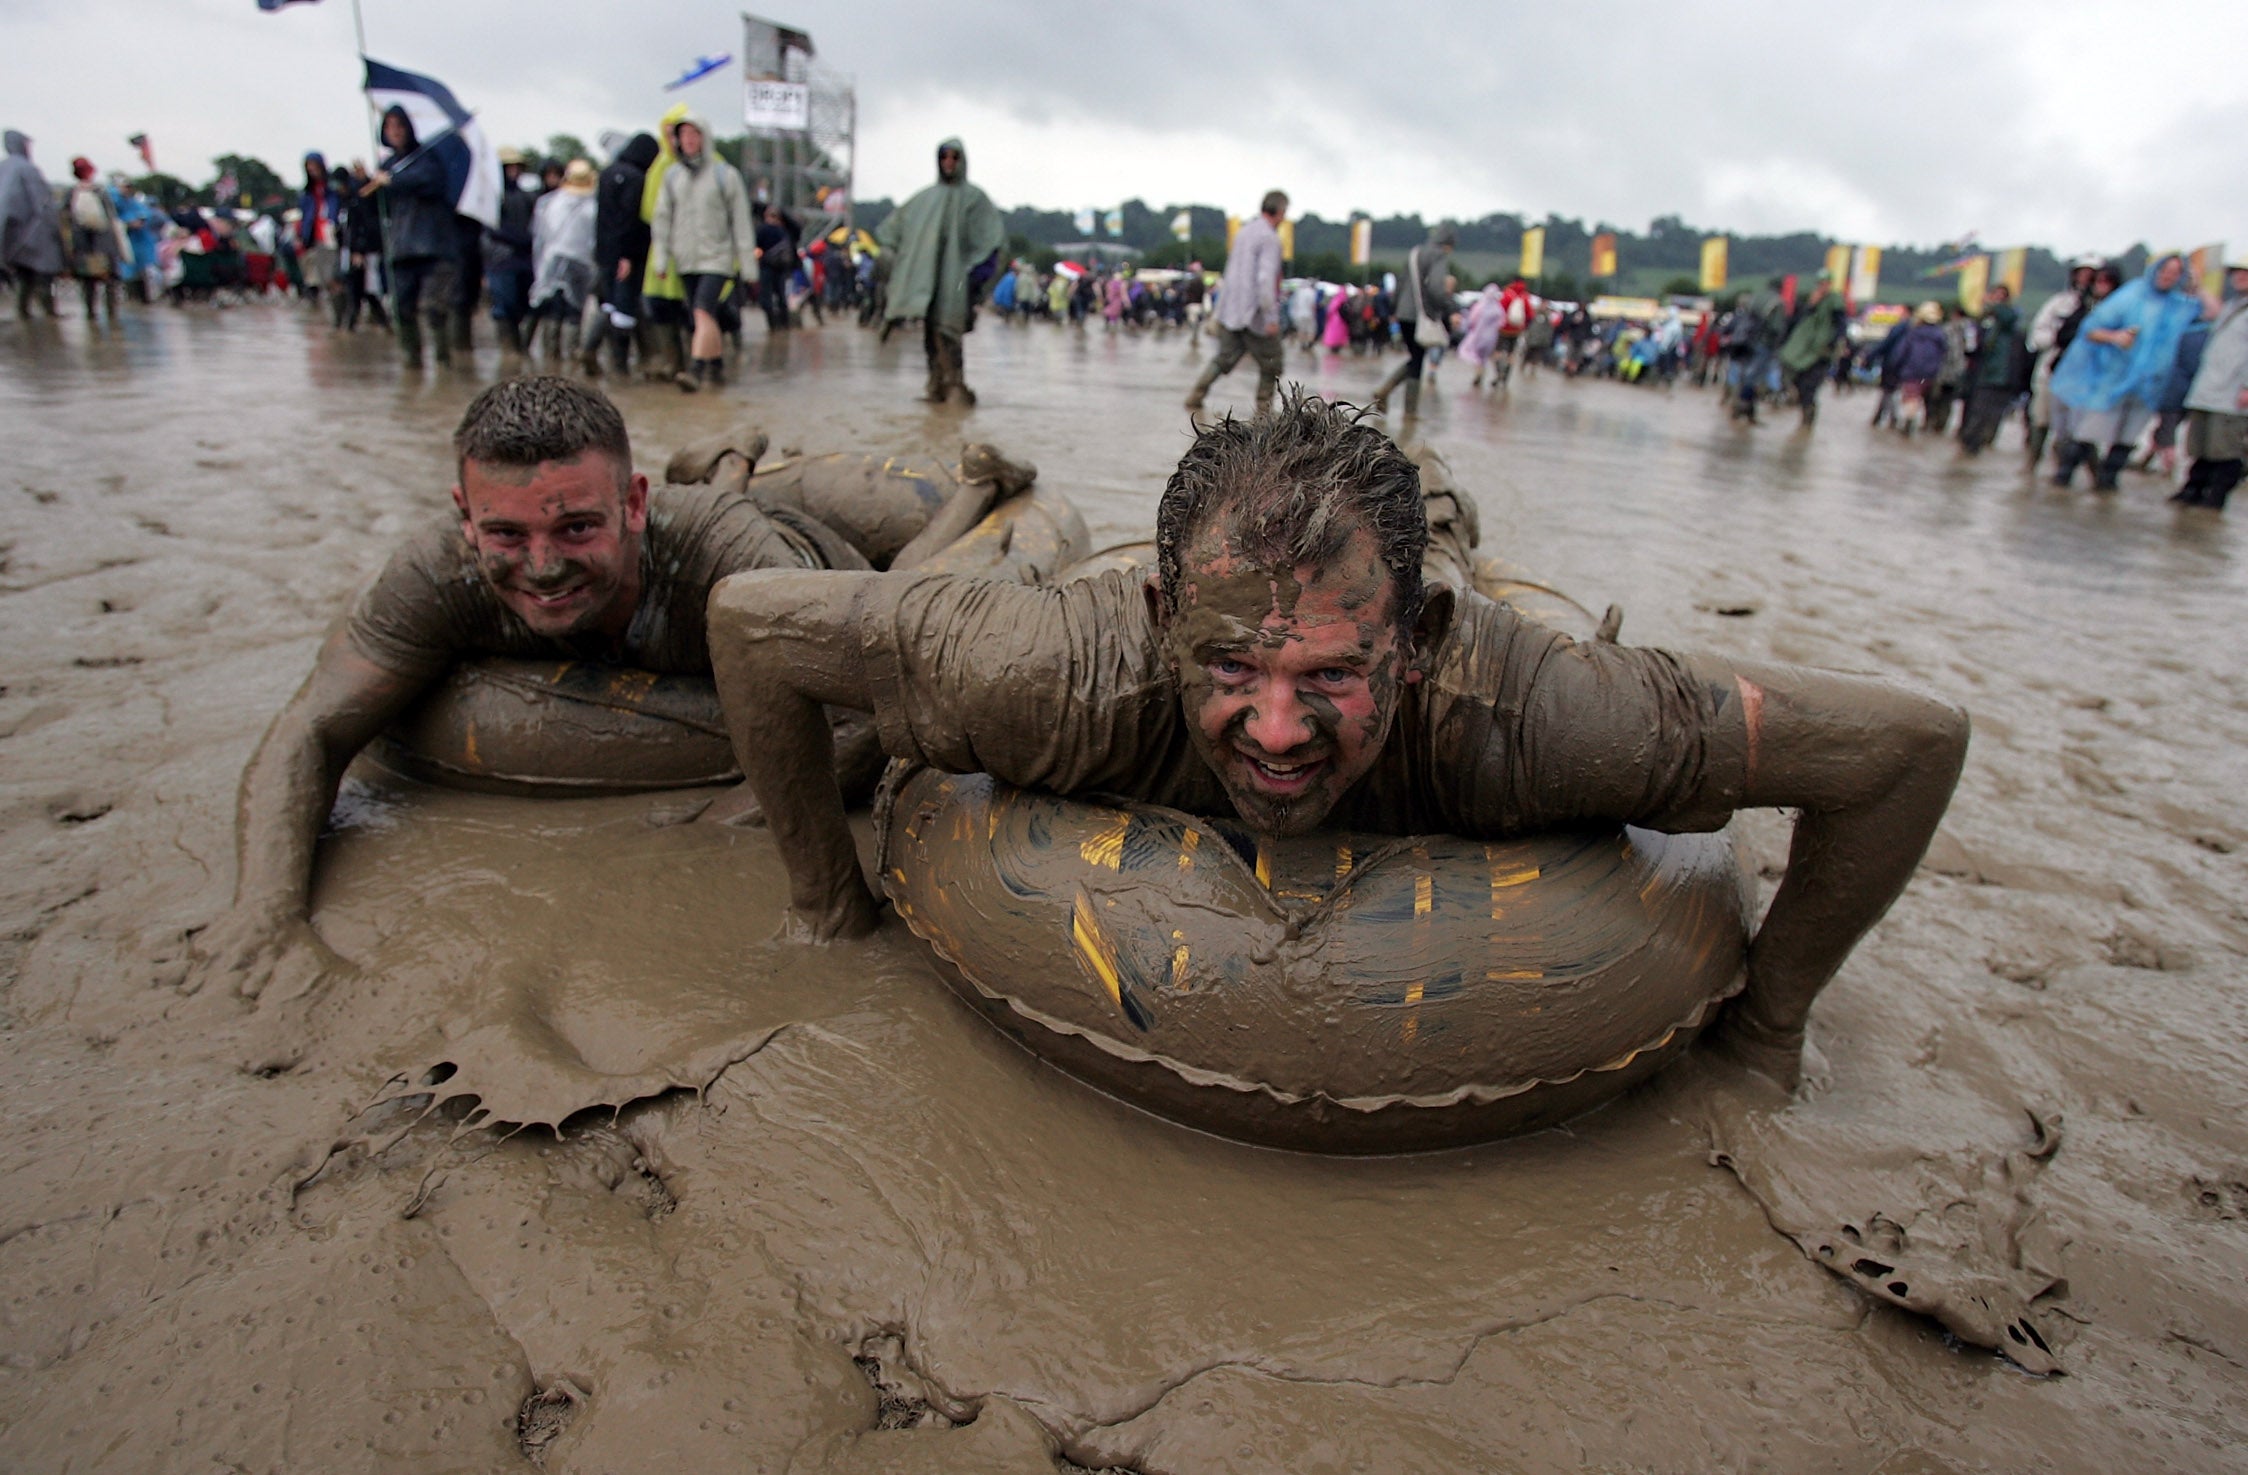 Two festival-goers sliding in the mud in 2007